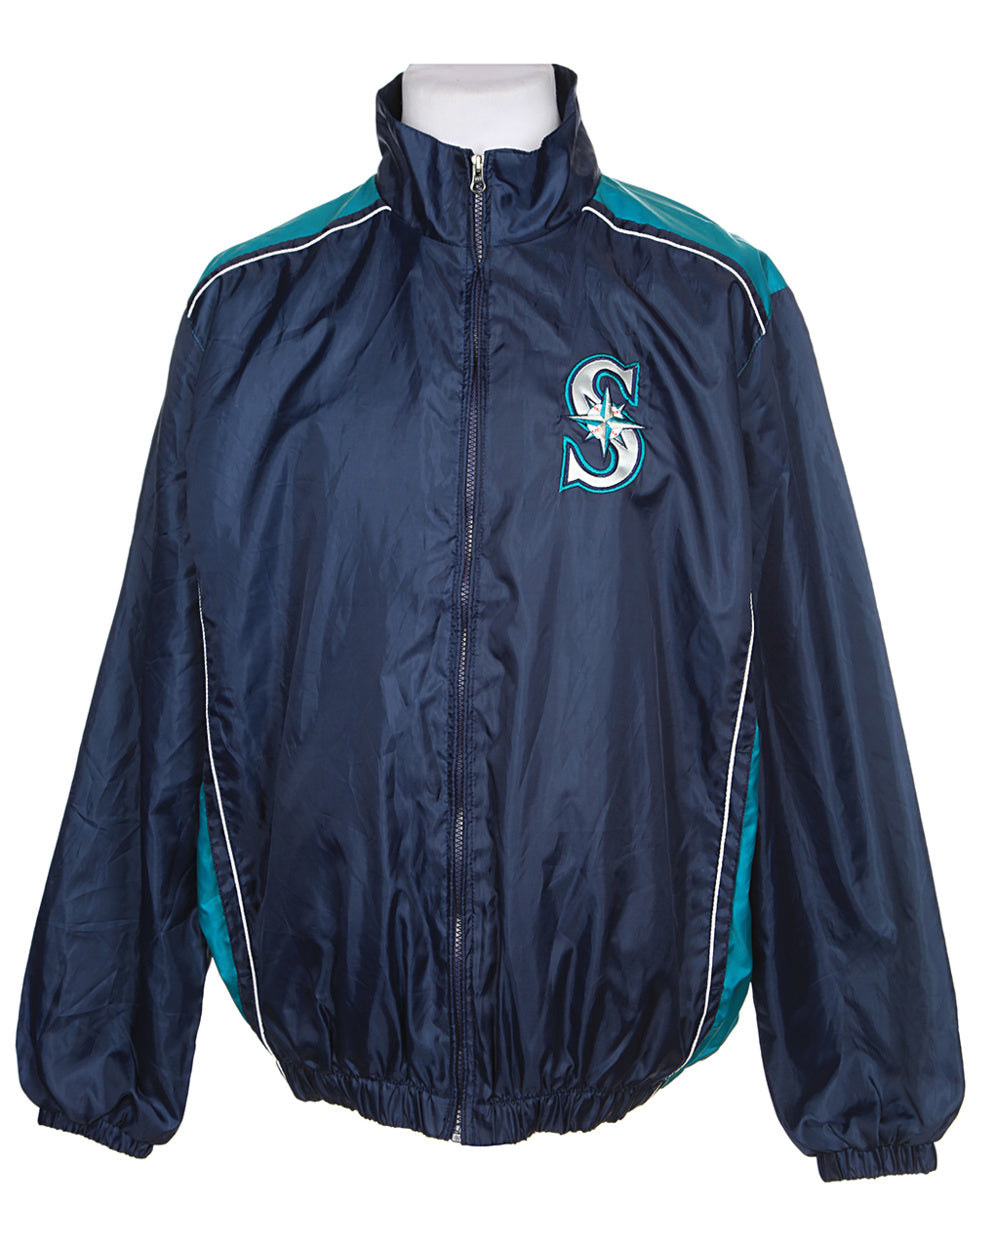 90s Seattle Mariners Navy & Blue Sports Jacket - L